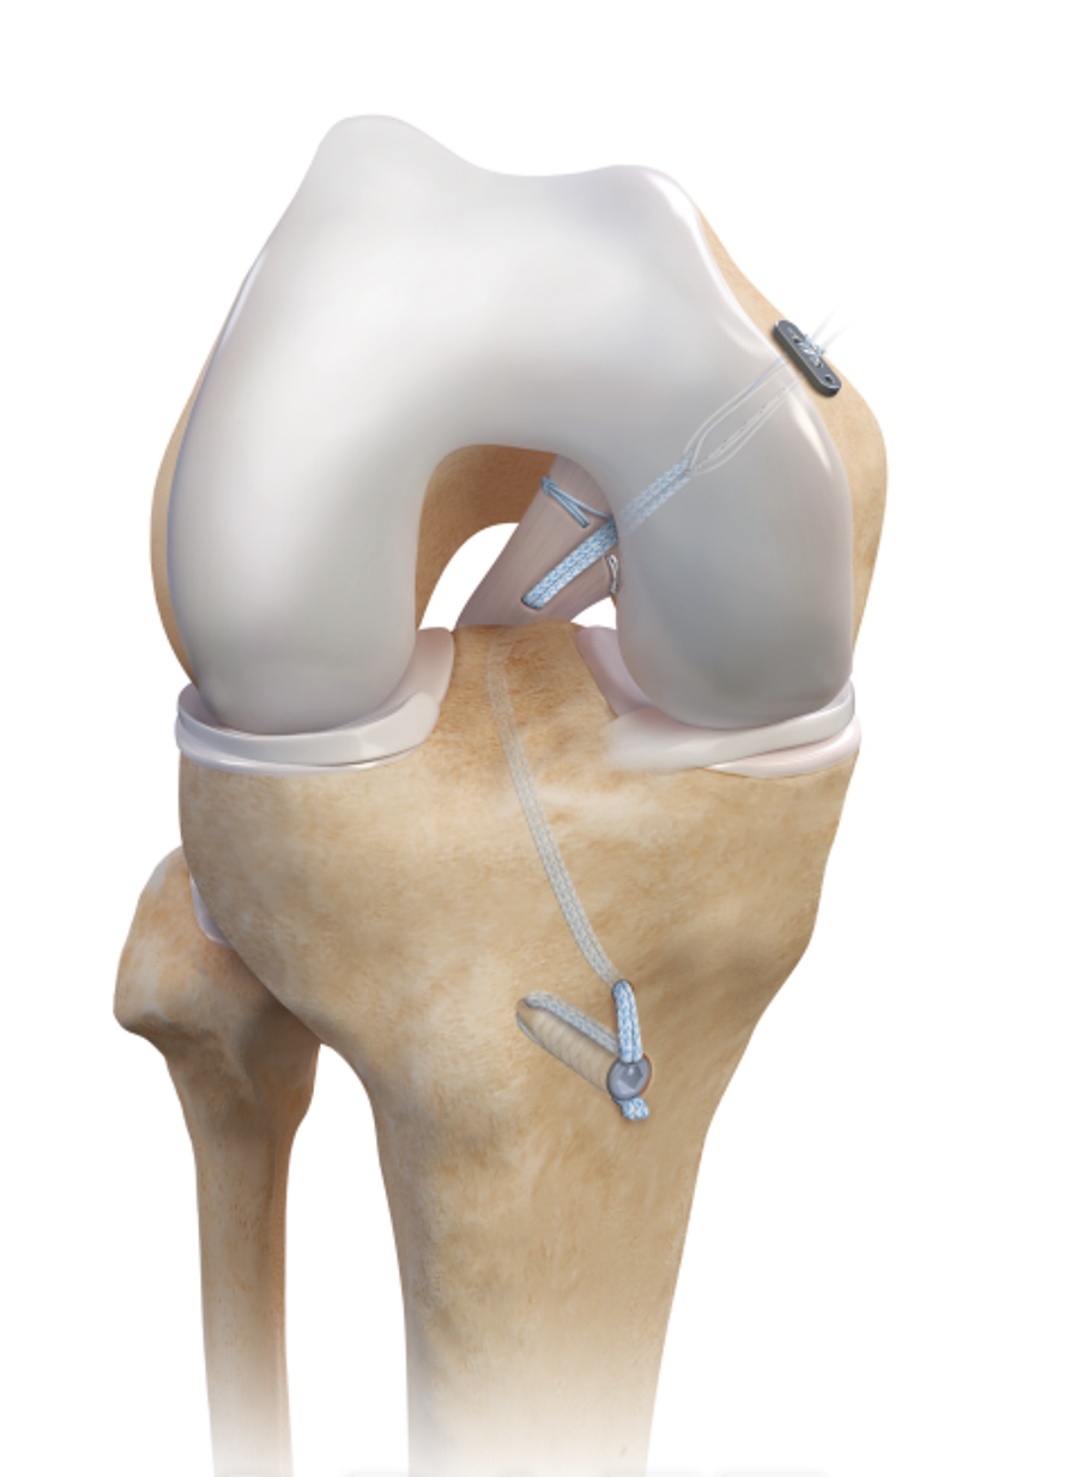 Cureus | Posterior Cruciate Ligament Repair With Suture Augmentation: A Report of Two Cases With Two-Year Follow-Up